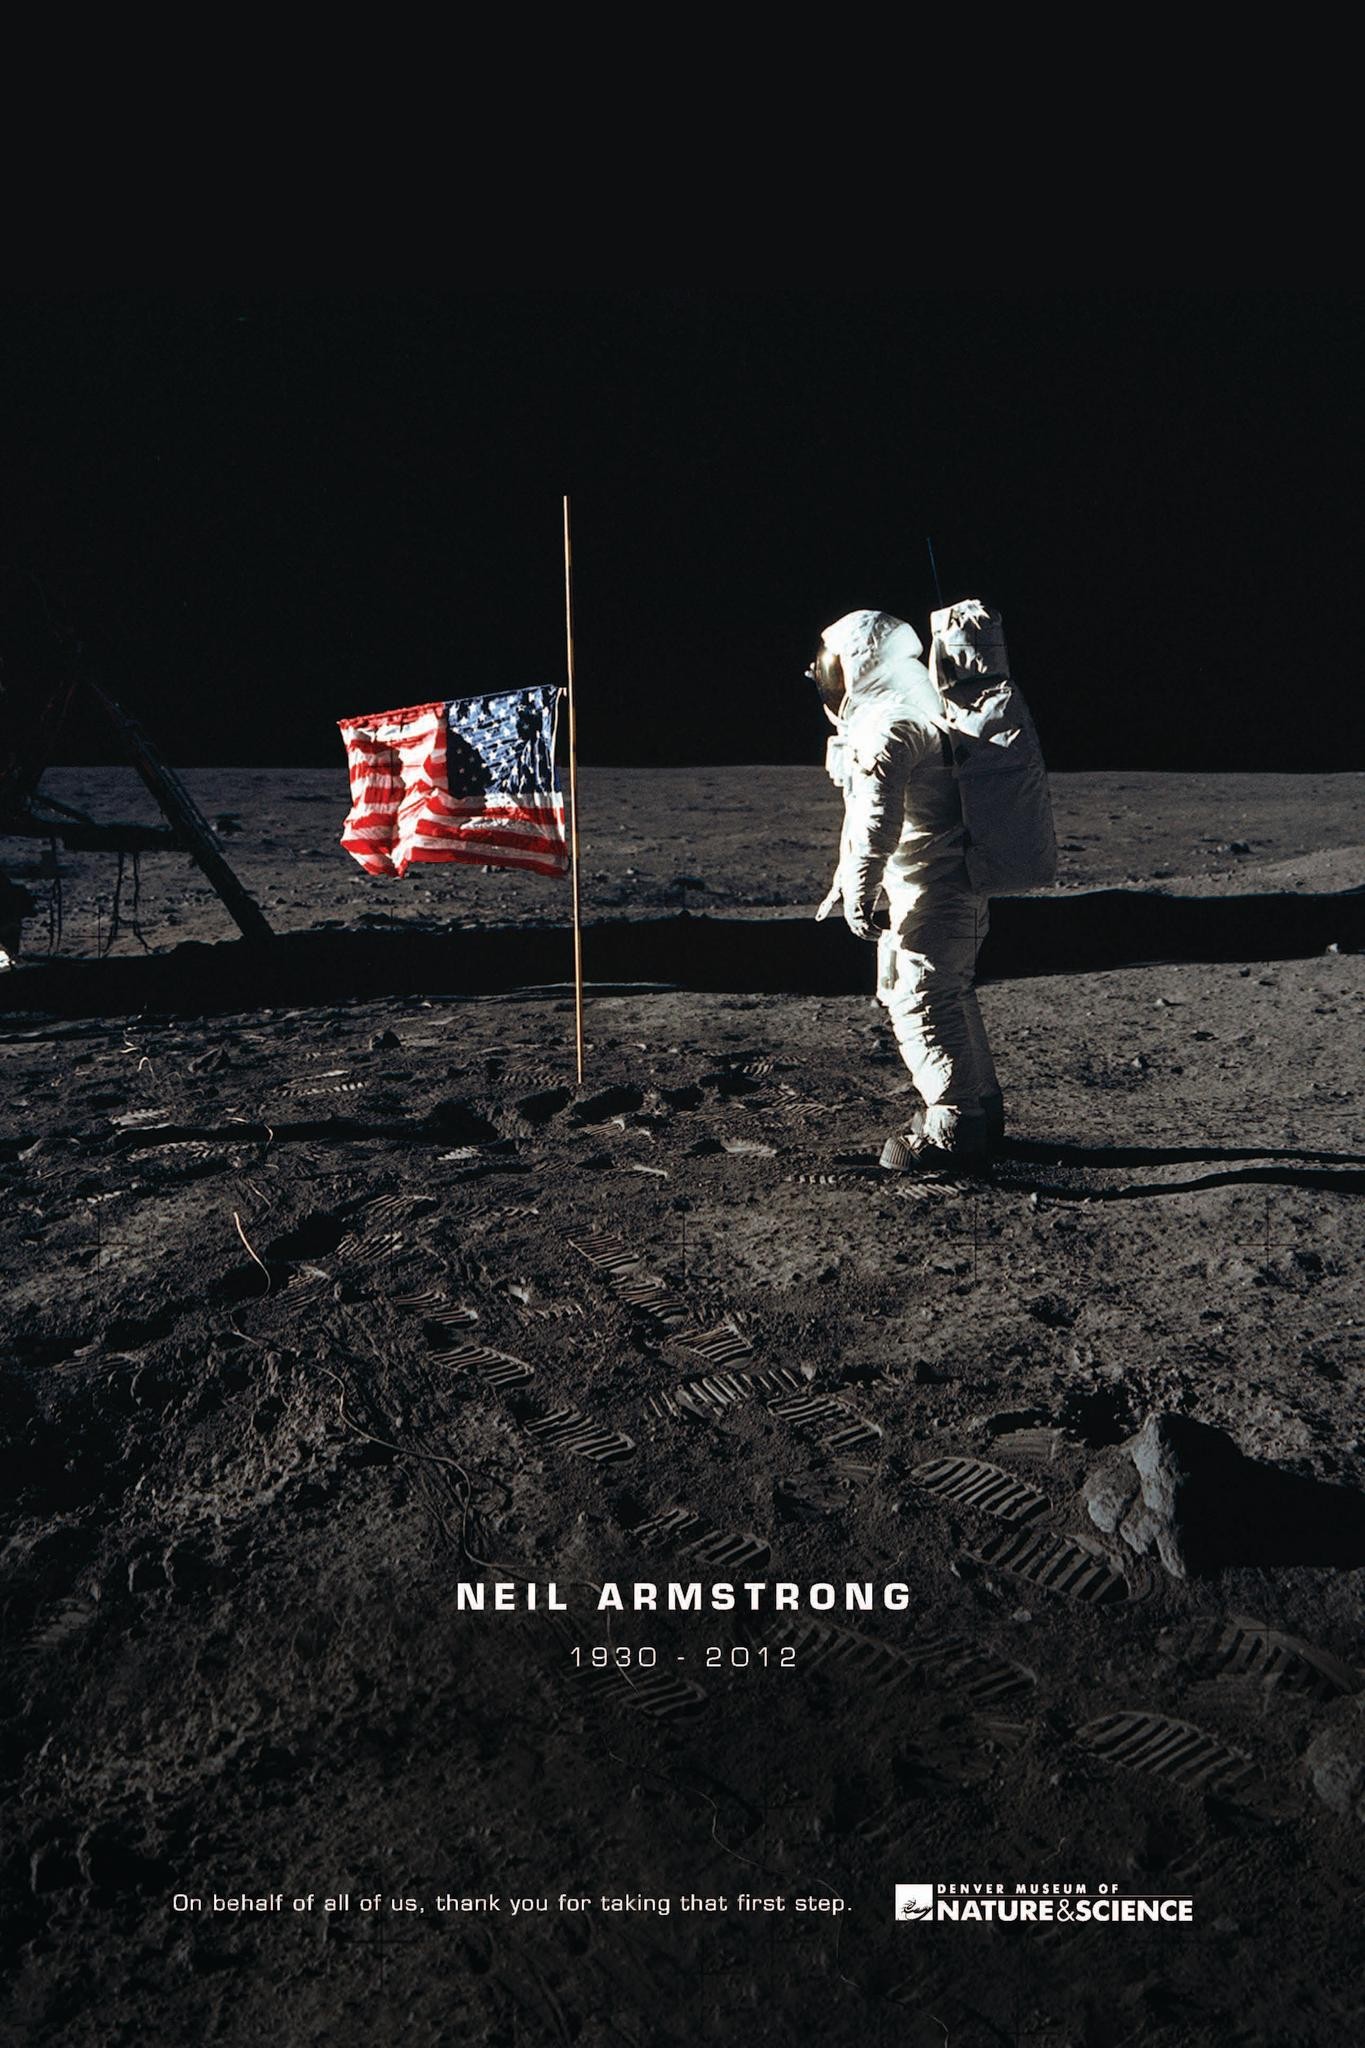 NEIL ARMSTRONG TRIBUTE